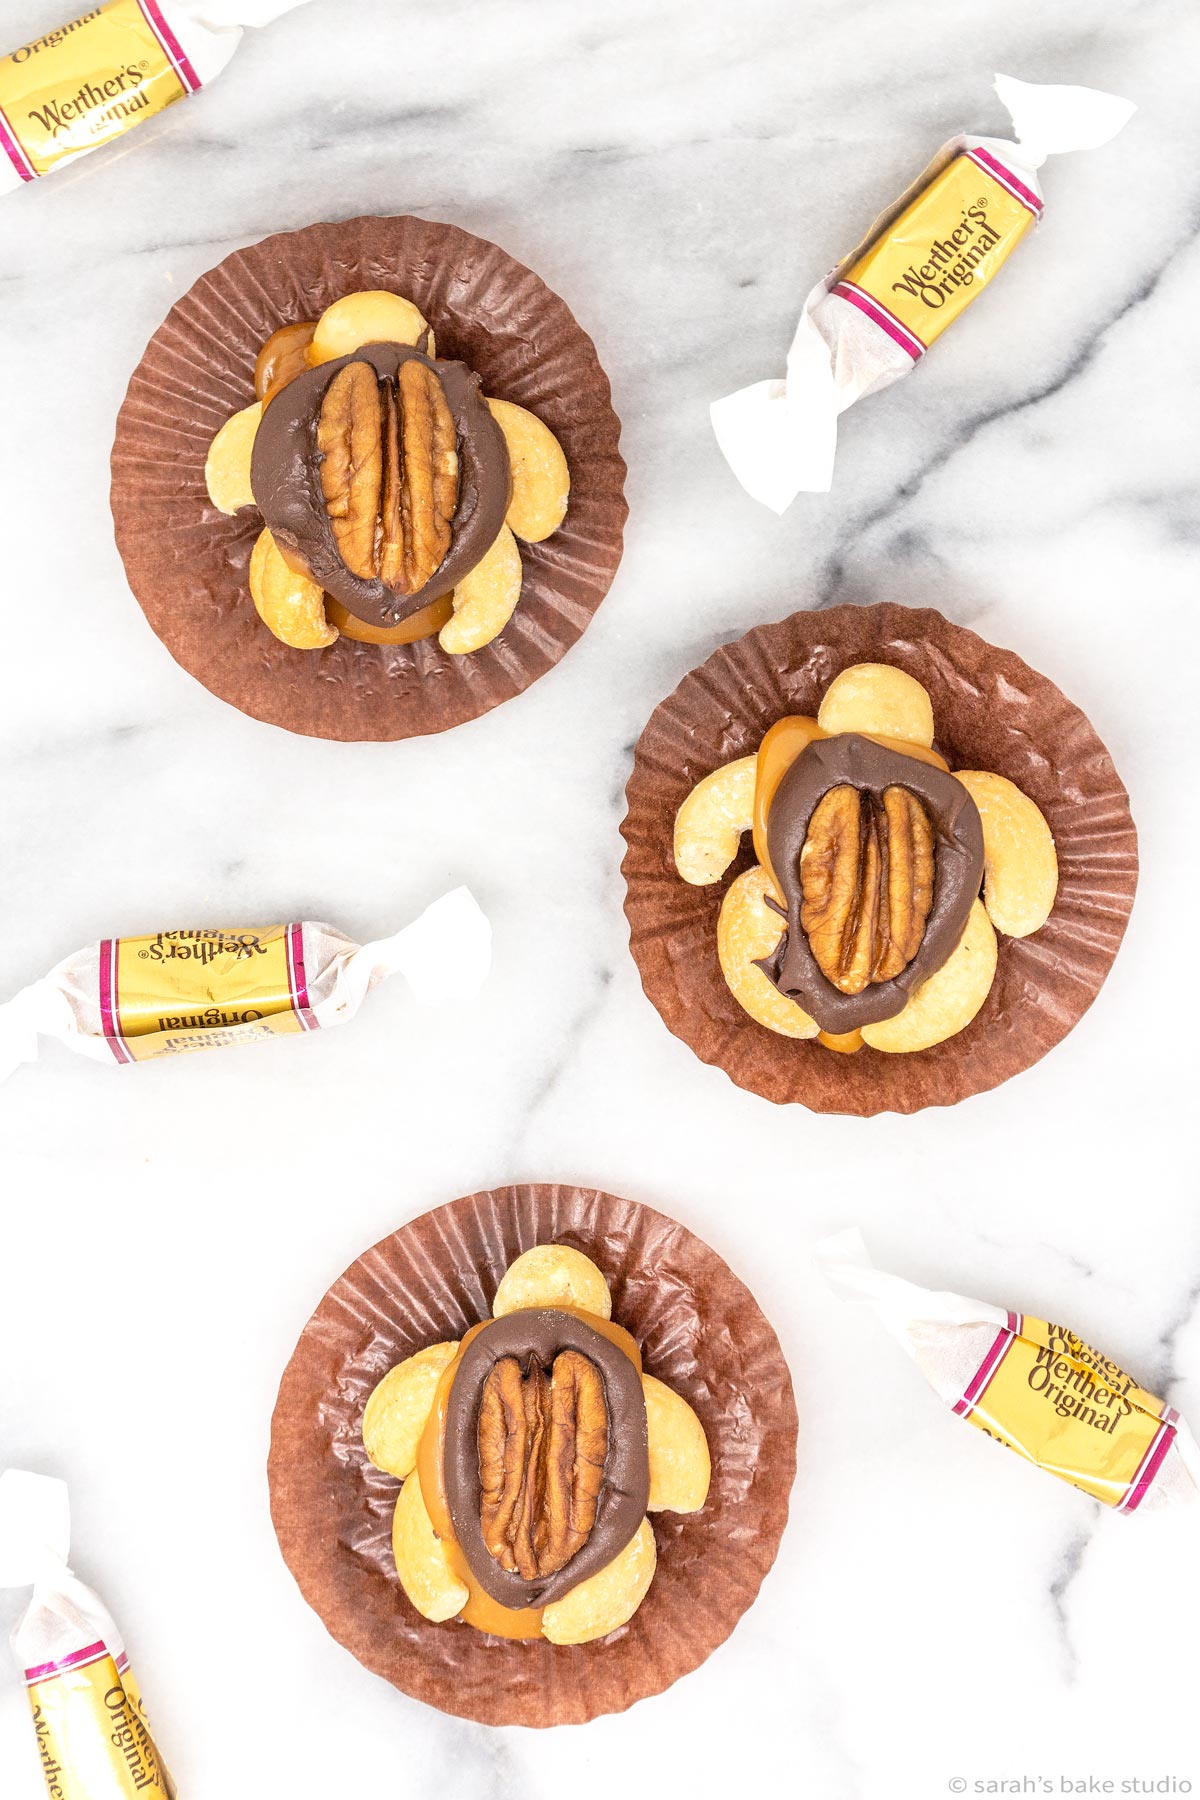 Chocolate Tortoises - delicious nutty homemade chocolate and caramel candies created with cashews, macadamia nuts, and pecans; a too cute and fun twist on Chocolate Turtles.